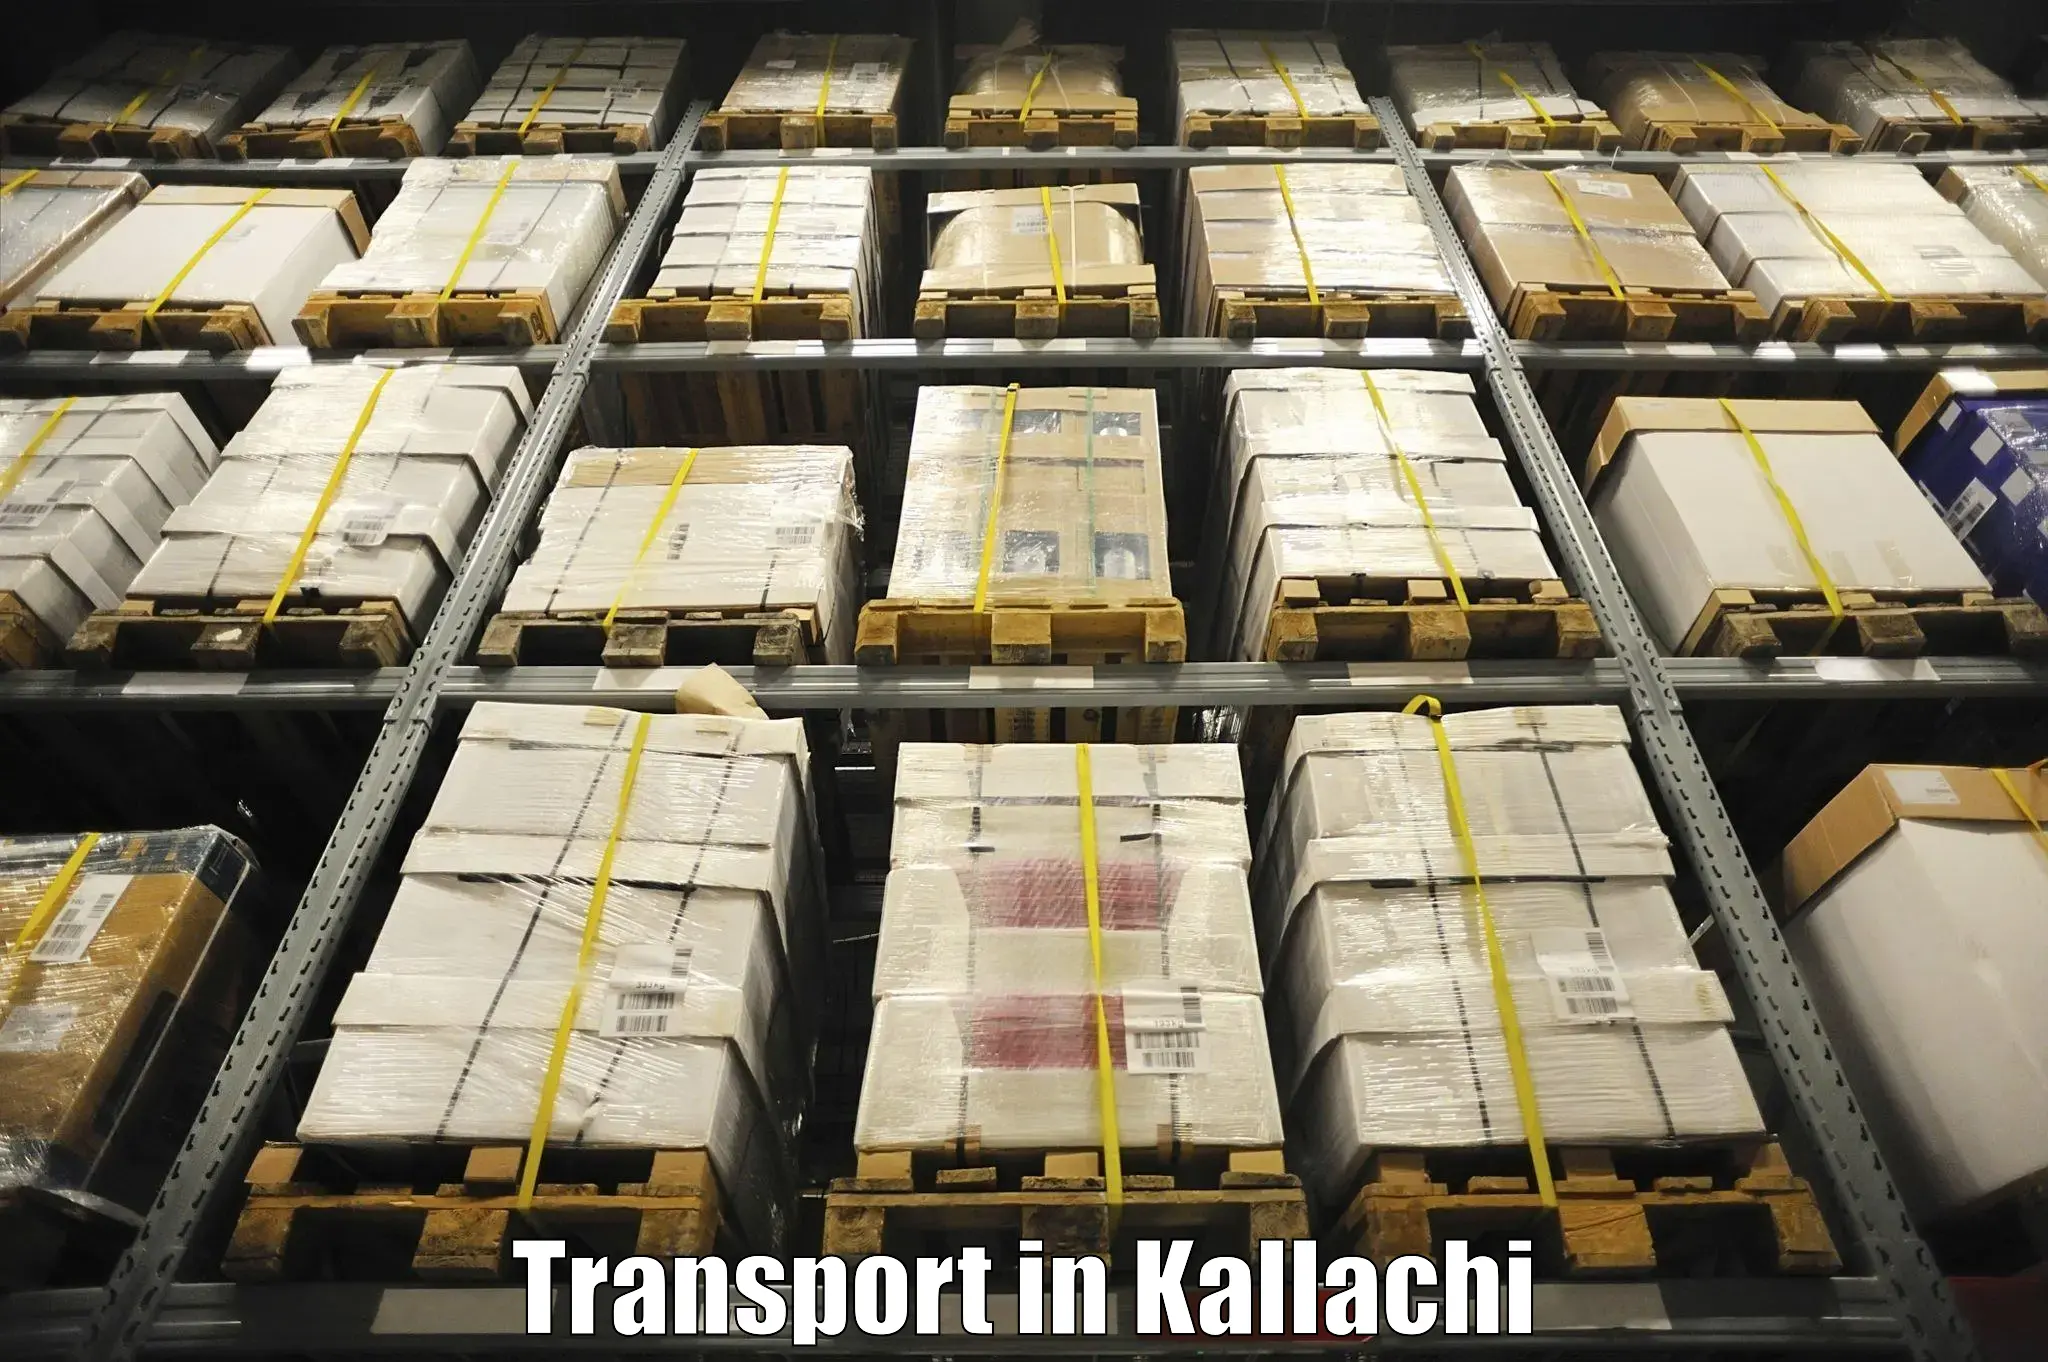 Road transport online services in Kallachi